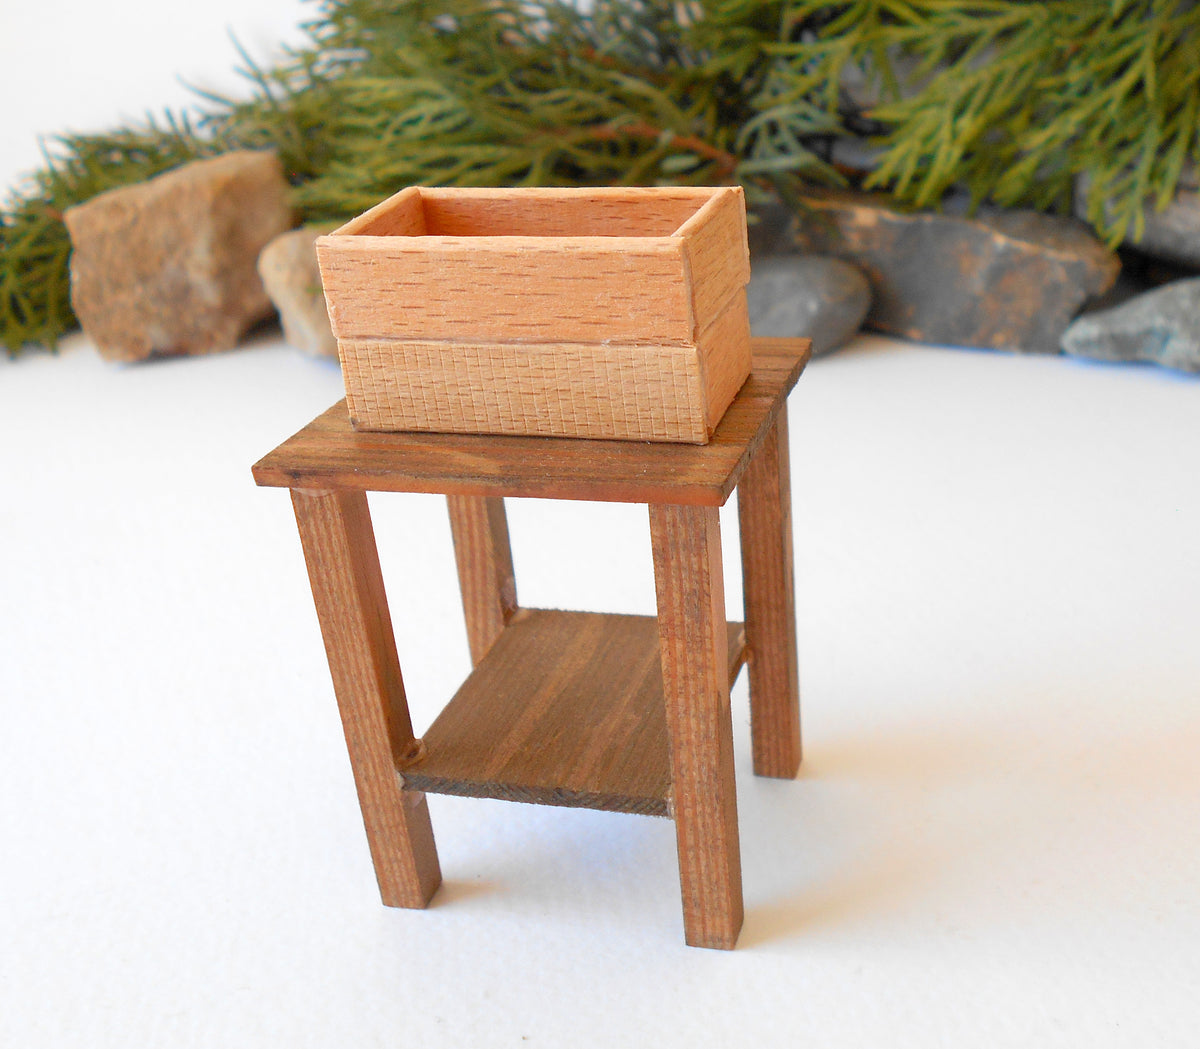 This is a Miniature nightstand or plant stand table of wooden furniture that is approximately 1/12 in scale. I have stained the mini nightstand with an Italian eco-friendly mordant in light brown.